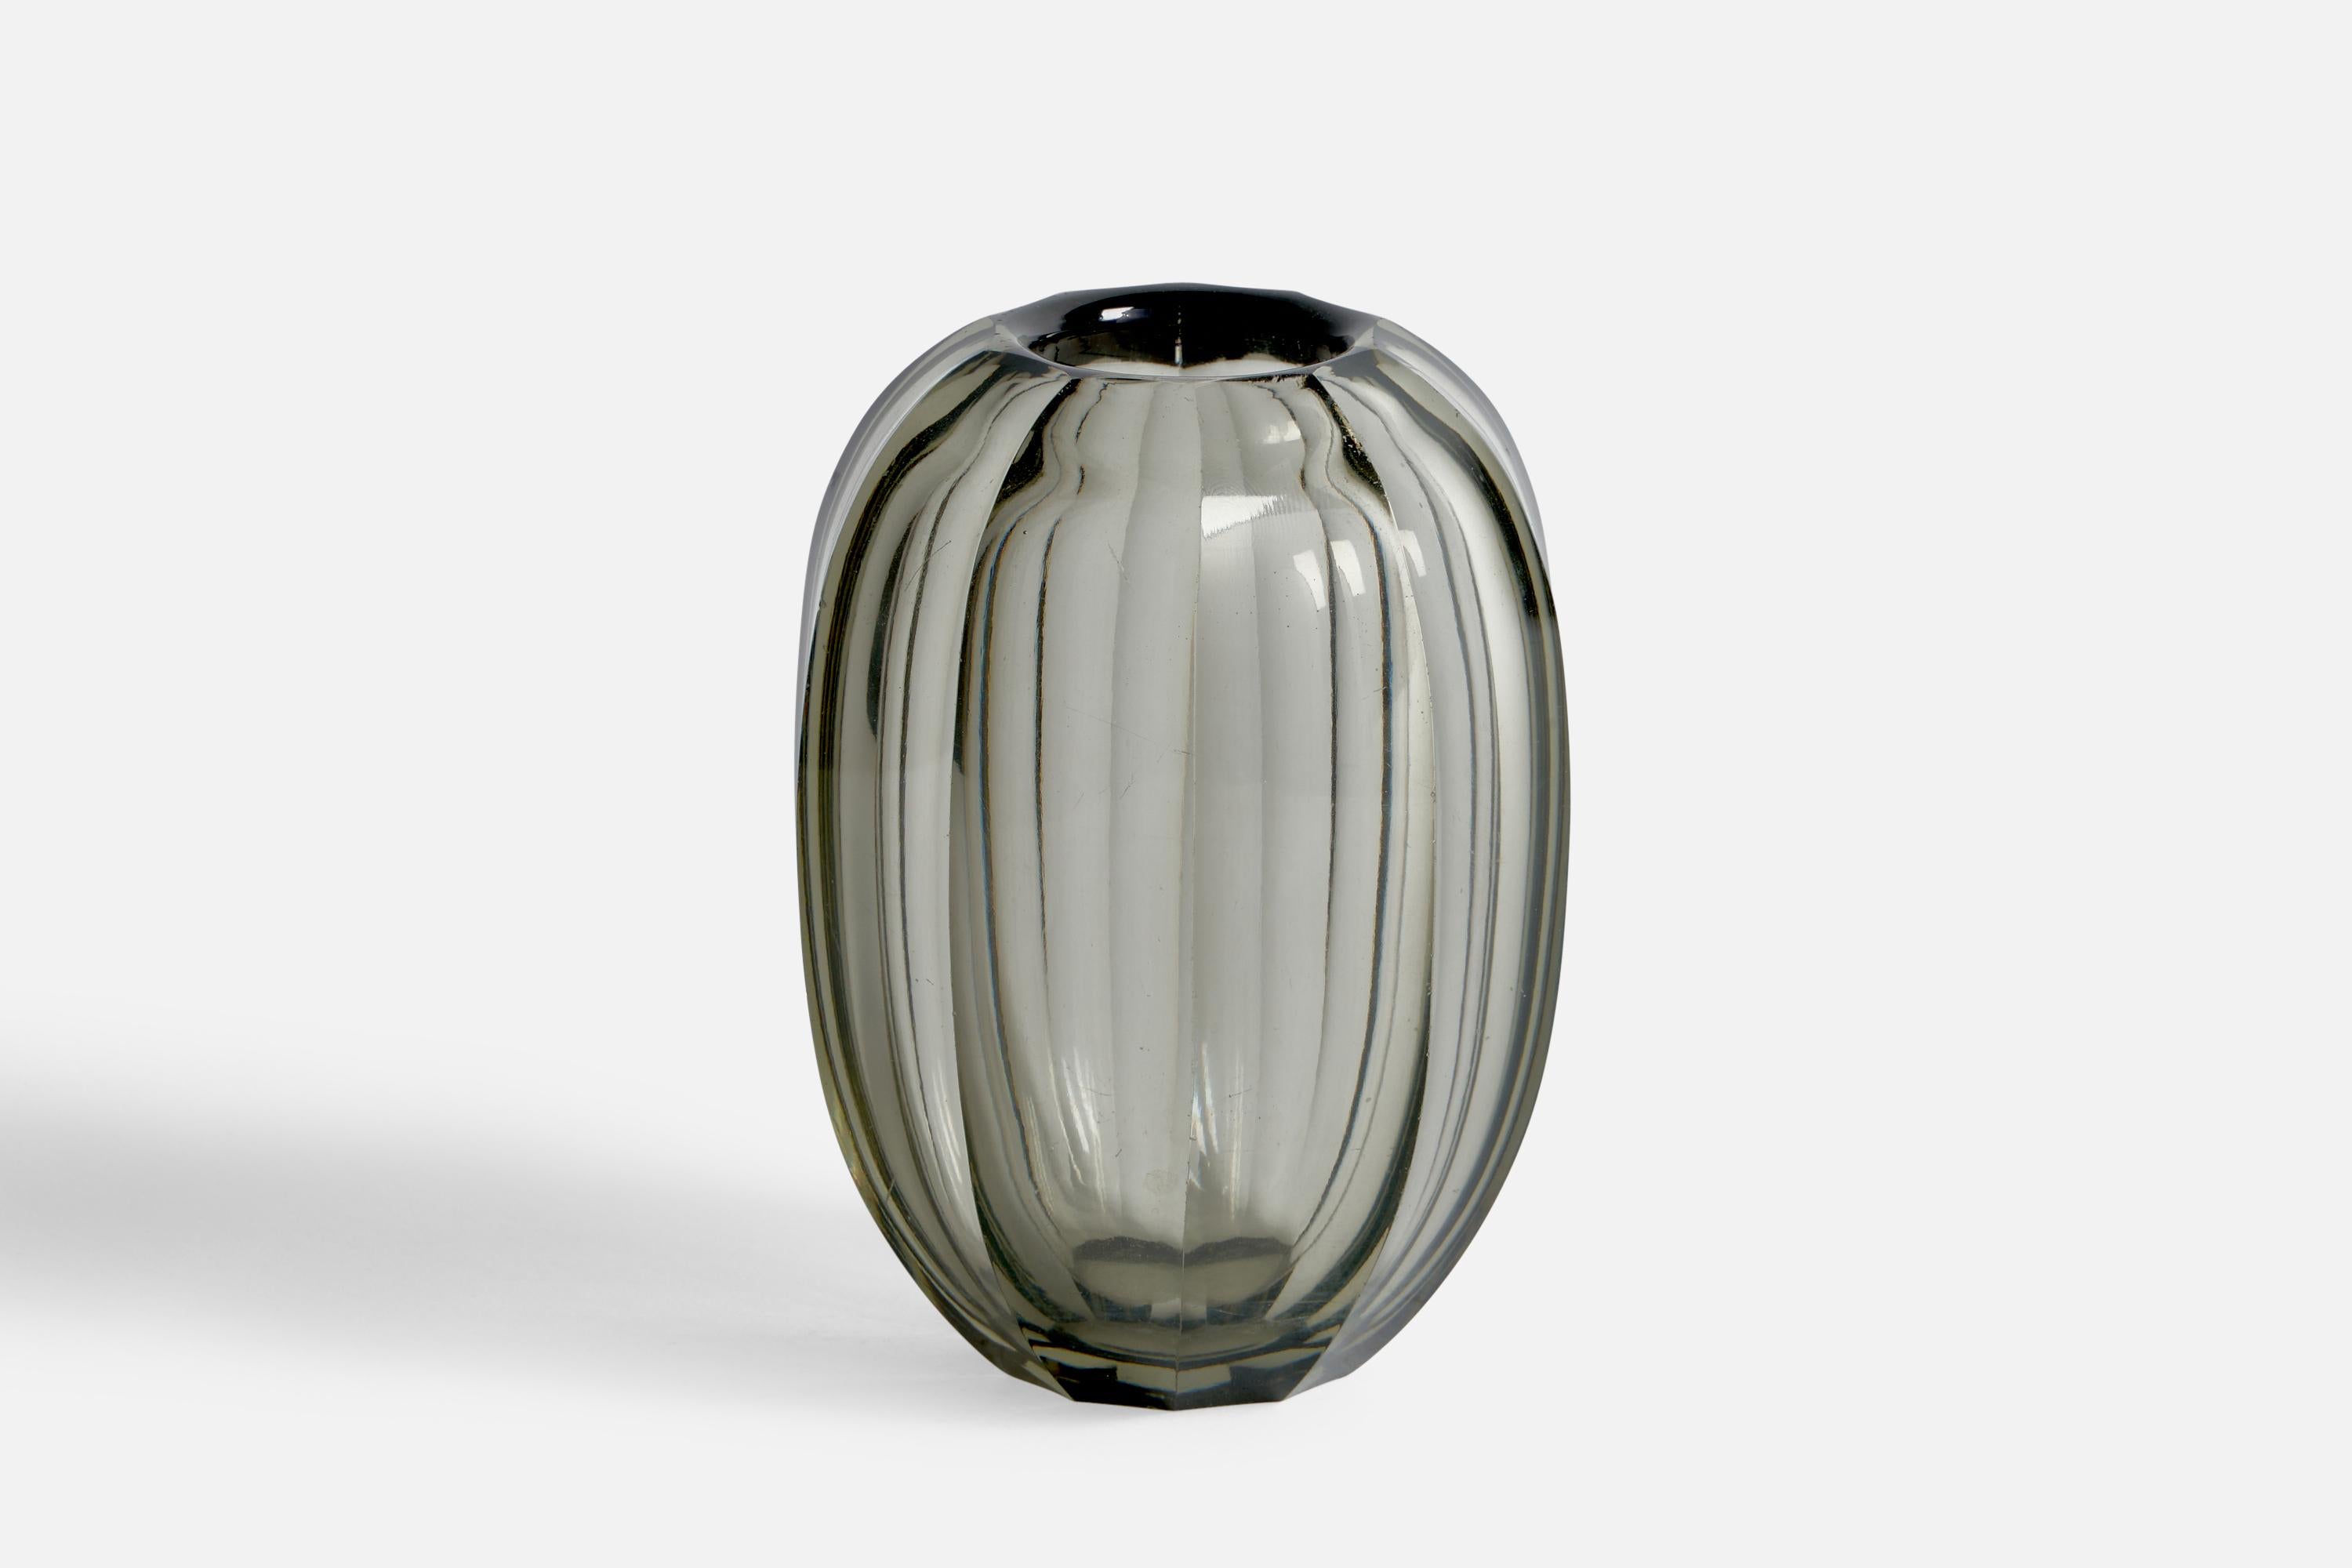 A smoked and fluted blown glass vase designed by Edward Hald and produced by Orrefors, Sweden, 1930s.